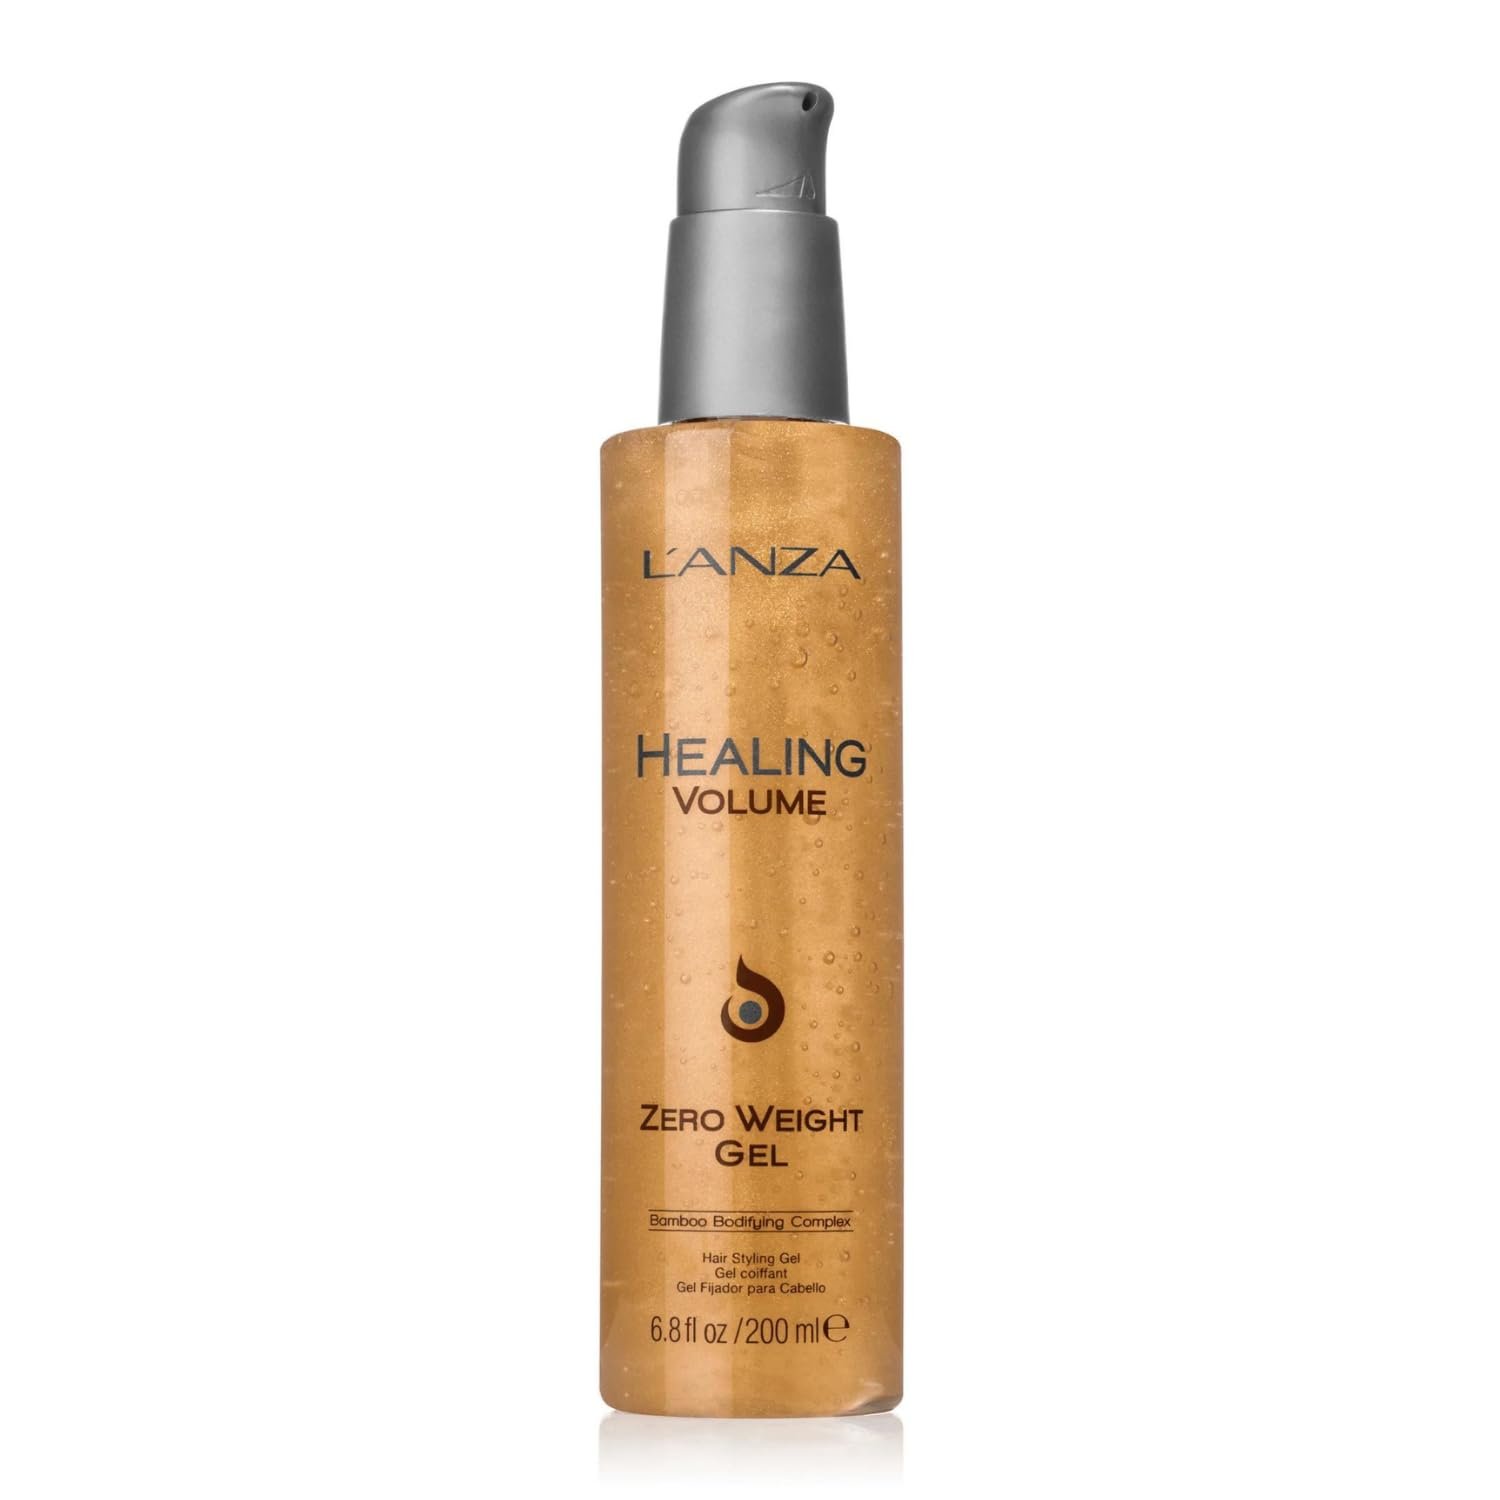 LANZA Healing Volume Zero Weight Gel, Dramatically Boosts Shine, Volume, and Thickness for Fine and Flat Hair, Rich with Bamboo Bodifying Complex and Keratin (6.8 Ounce)